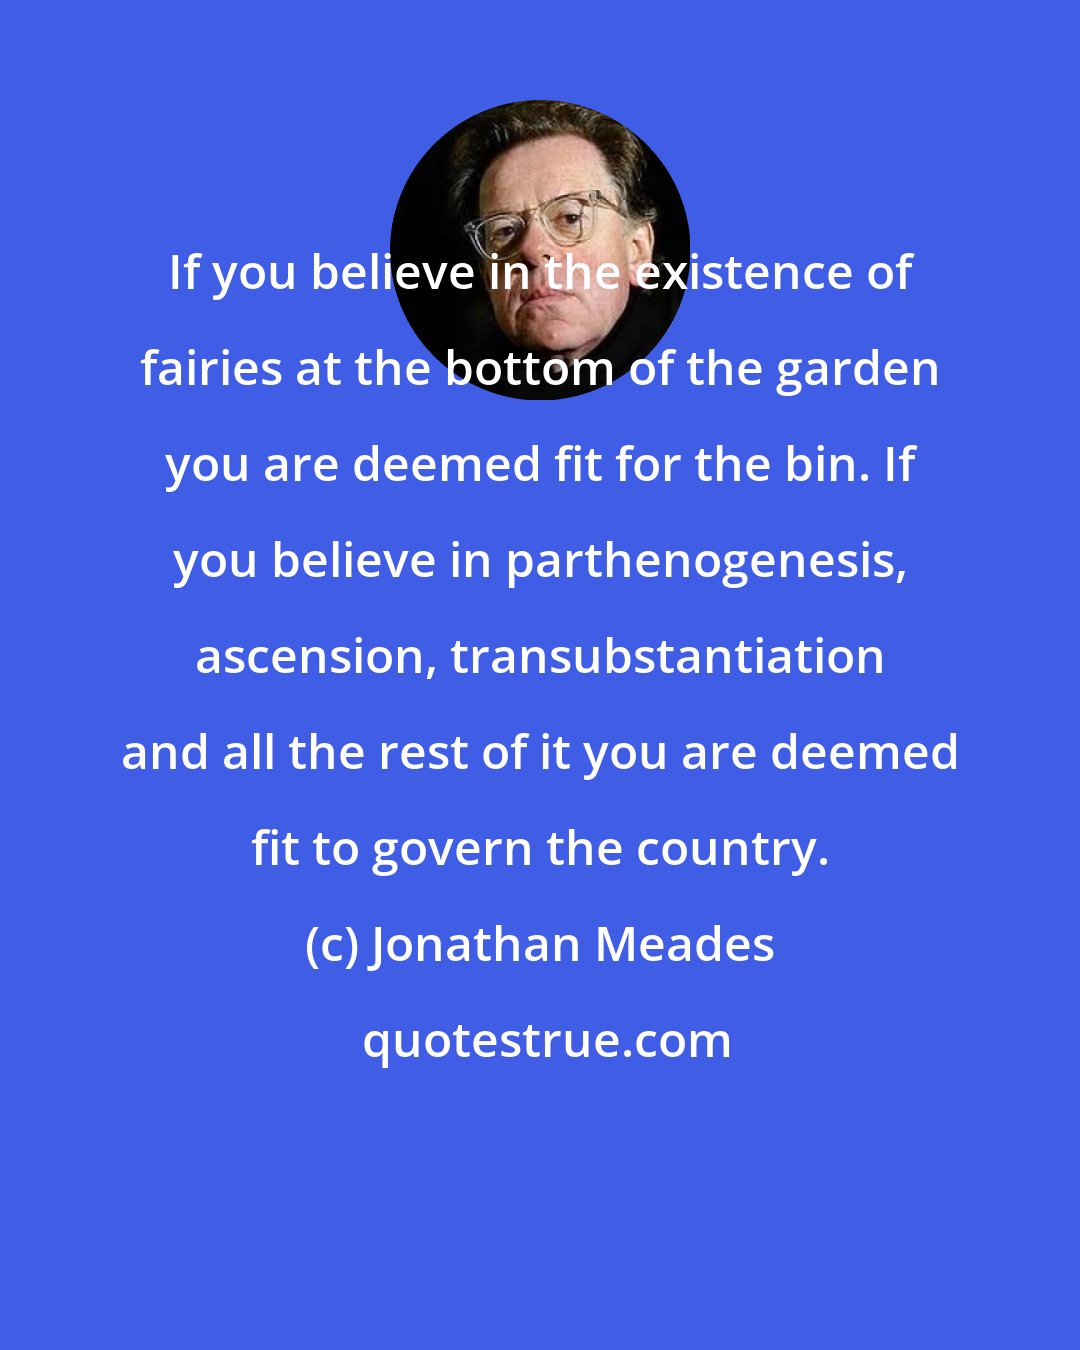 Jonathan Meades: If you believe in the existence of fairies at the bottom of the garden you are deemed fit for the bin. If you believe in parthenogenesis, ascension, transubstantiation and all the rest of it you are deemed fit to govern the country.